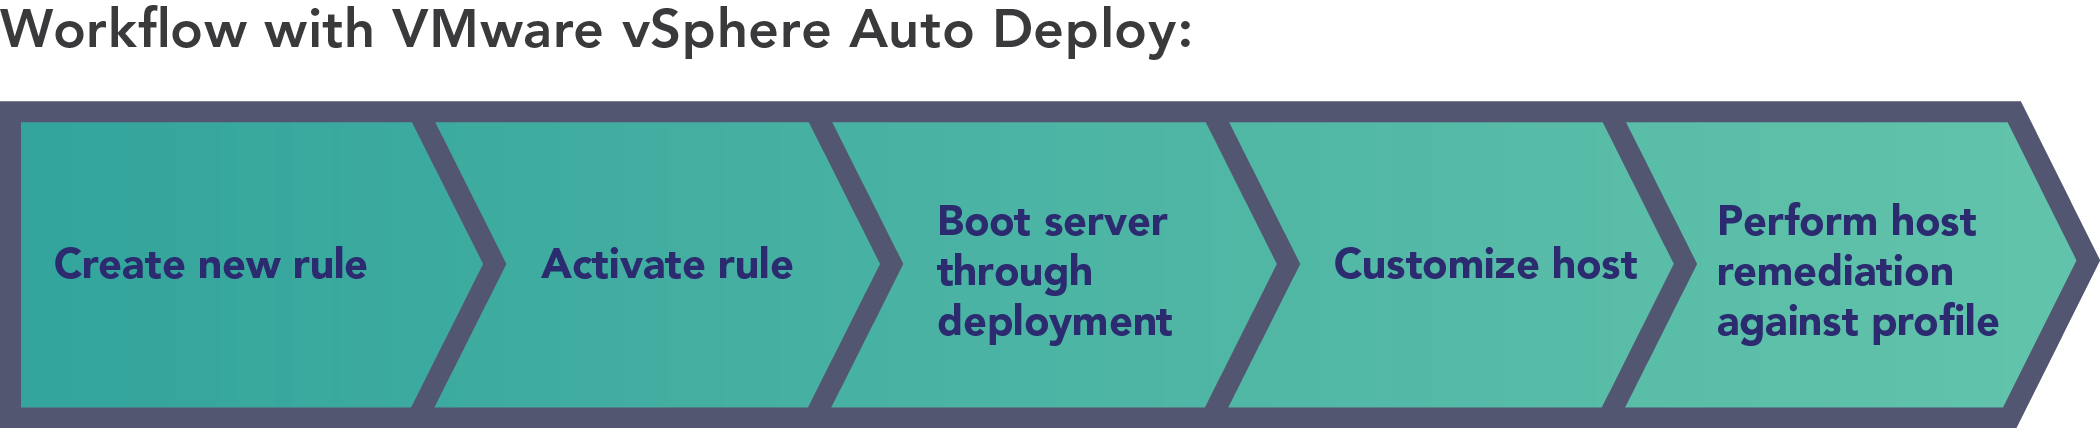 Diagram showing the five high-level steps necessary to deploy a host using VMware vSphere Auto Deploy. The steps are “Create new rule,” “Activate rule,” “Boot server through deployment,” “Customize host,” and “Perform host remediation against profile.”